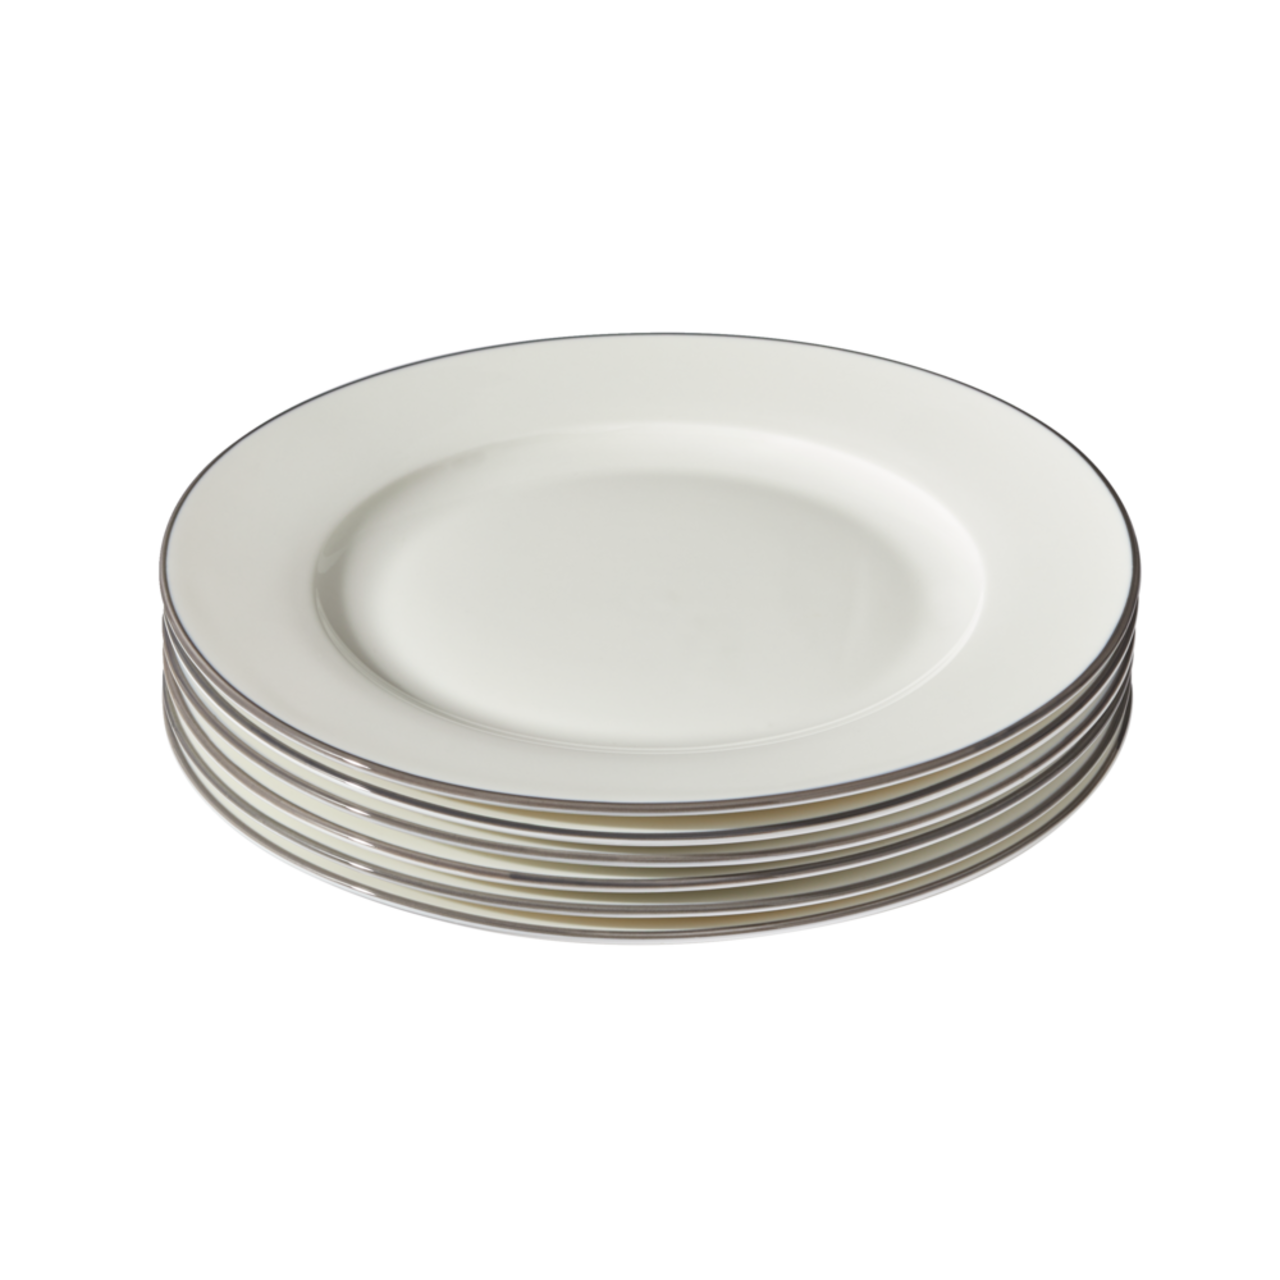 https://media-www.canadiantire.ca/product/living/kitchen/dining-and-entertaining/1429836/paderno-bonavista-mid-rim-salad-plate-set-fd4b4626-94f2-4687-9a7a-295d21df5966.png?imdensity=1&imwidth=640&impolicy=mZoom